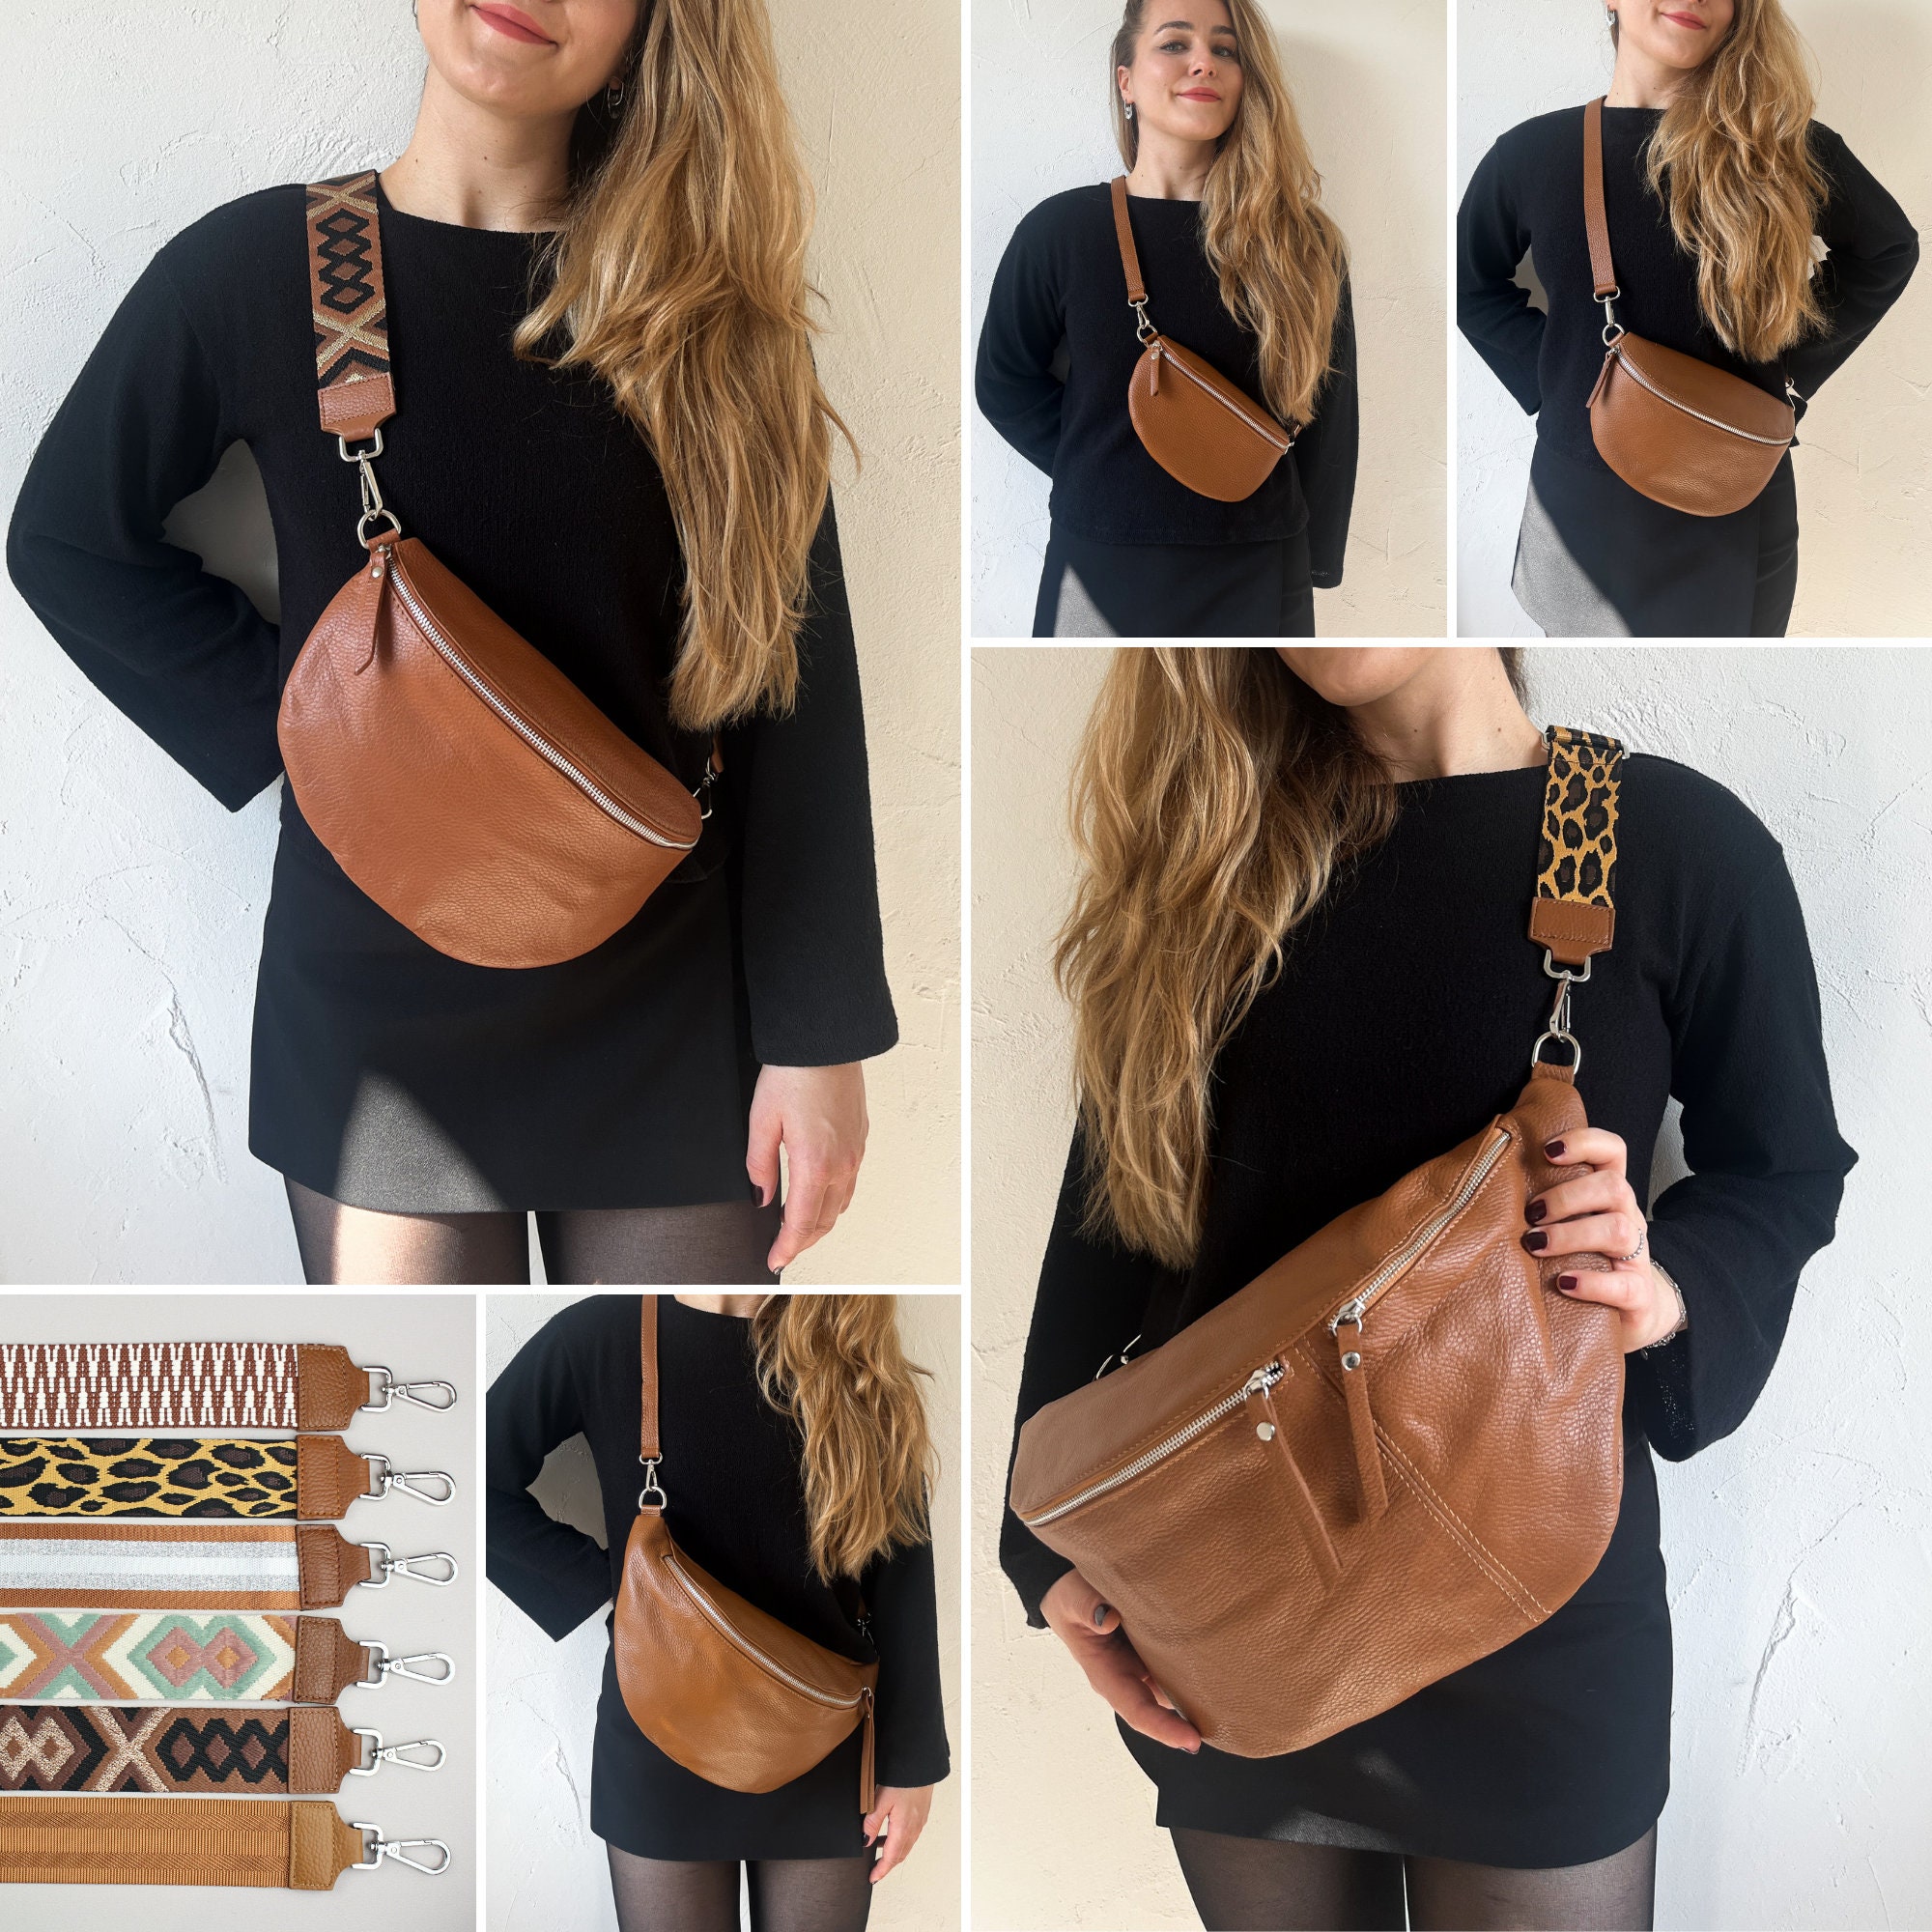 Cognac Leather Fanny Pack With 2 Straps for Women Leather - Etsy